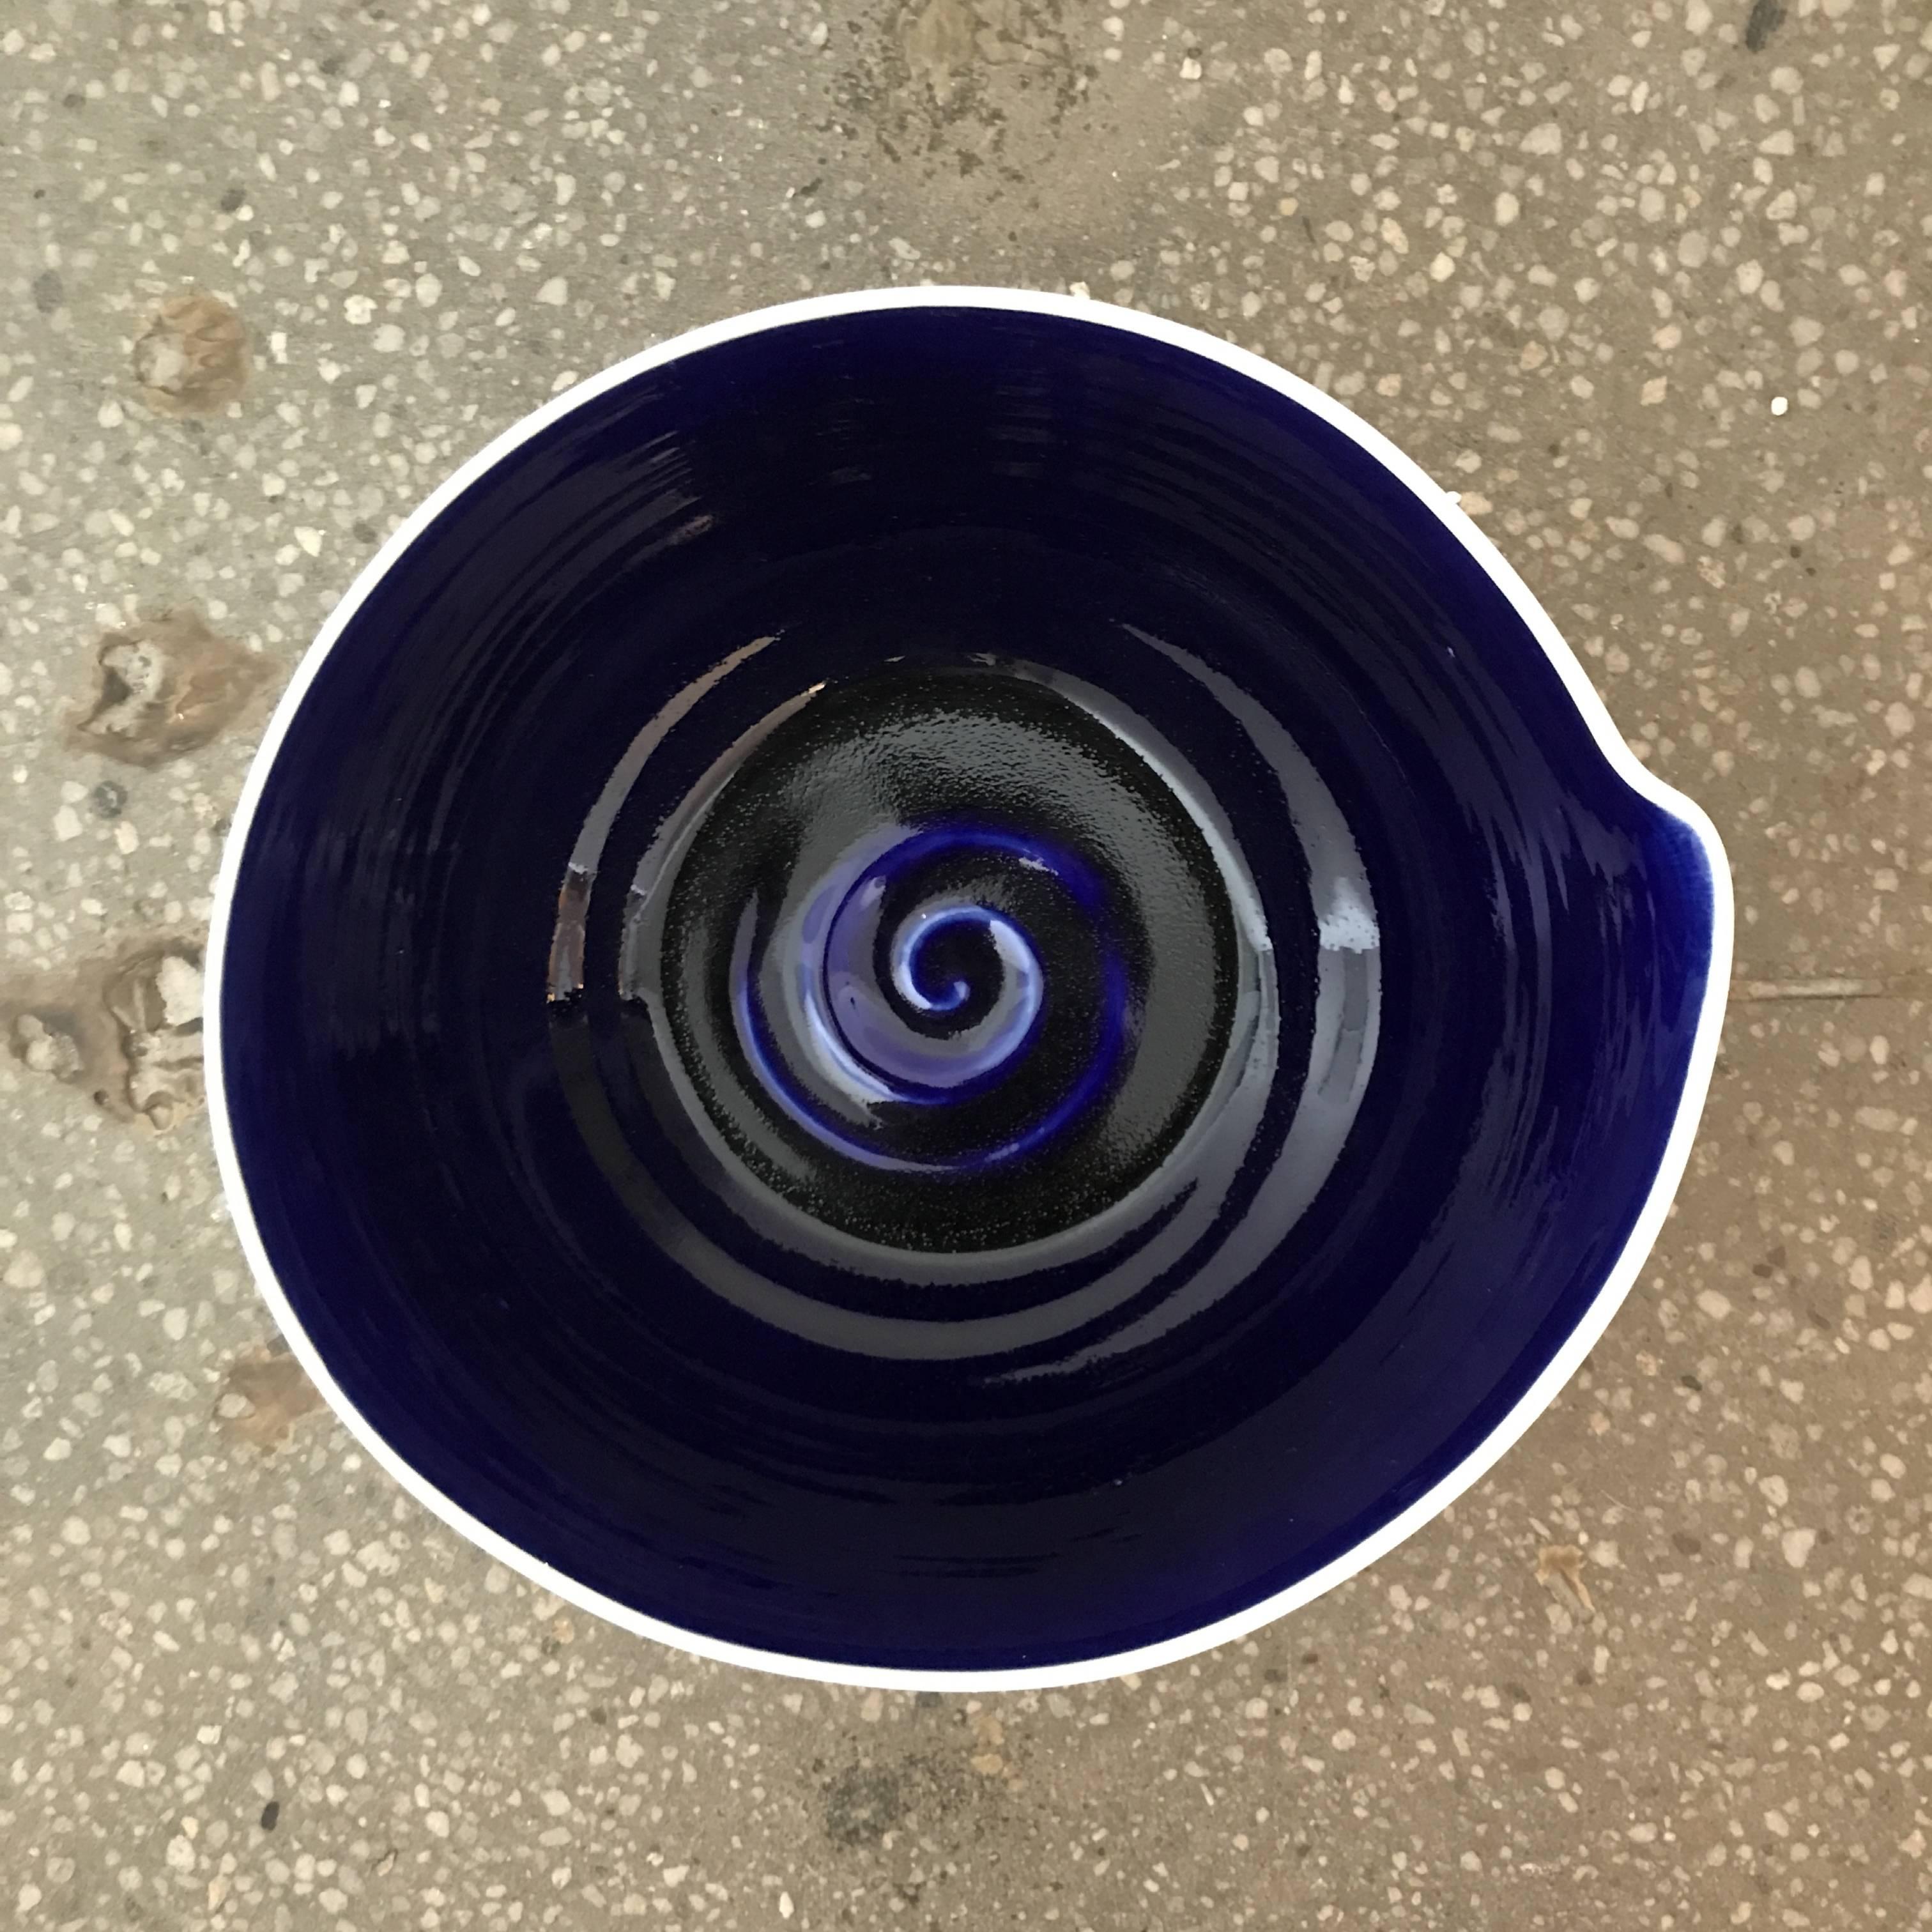 Hand-thrown blue and white ceramic studio pottery bowls created by a local artisan in Jaffa Israel. 
Indigo blue interior with white exterior. Subtle bend detail on the rim of each bowl. Intricate graphics and artist signature on the bottom. 11